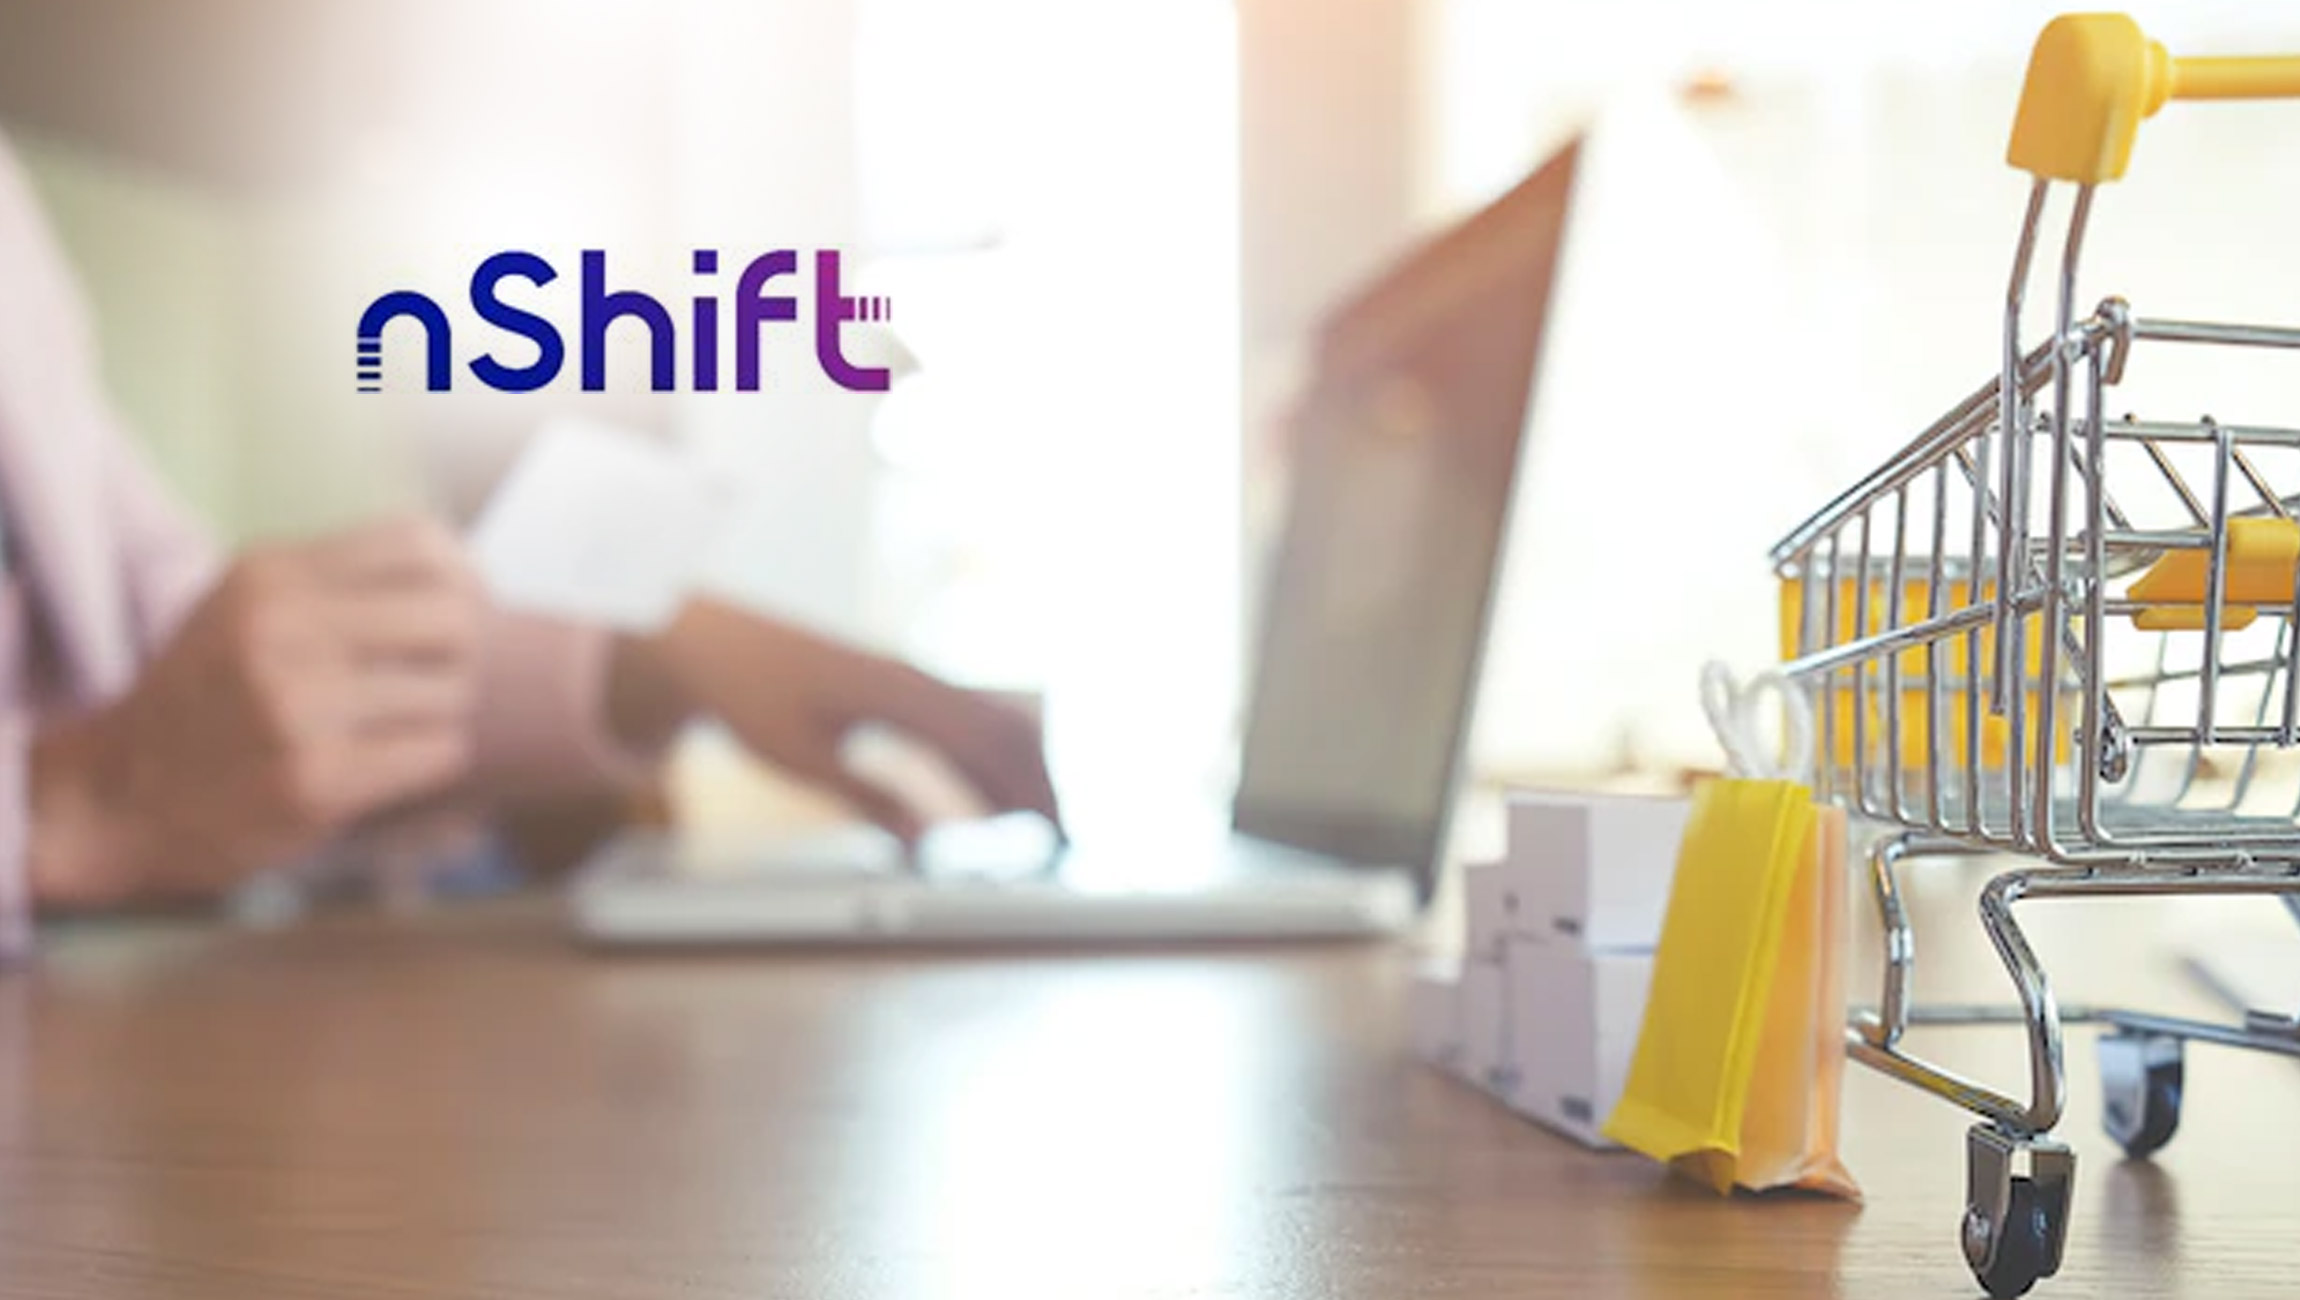 Nshift: Only One in 12 Retailers Included Free Delivery as a Part of Their Black Friday Promotions